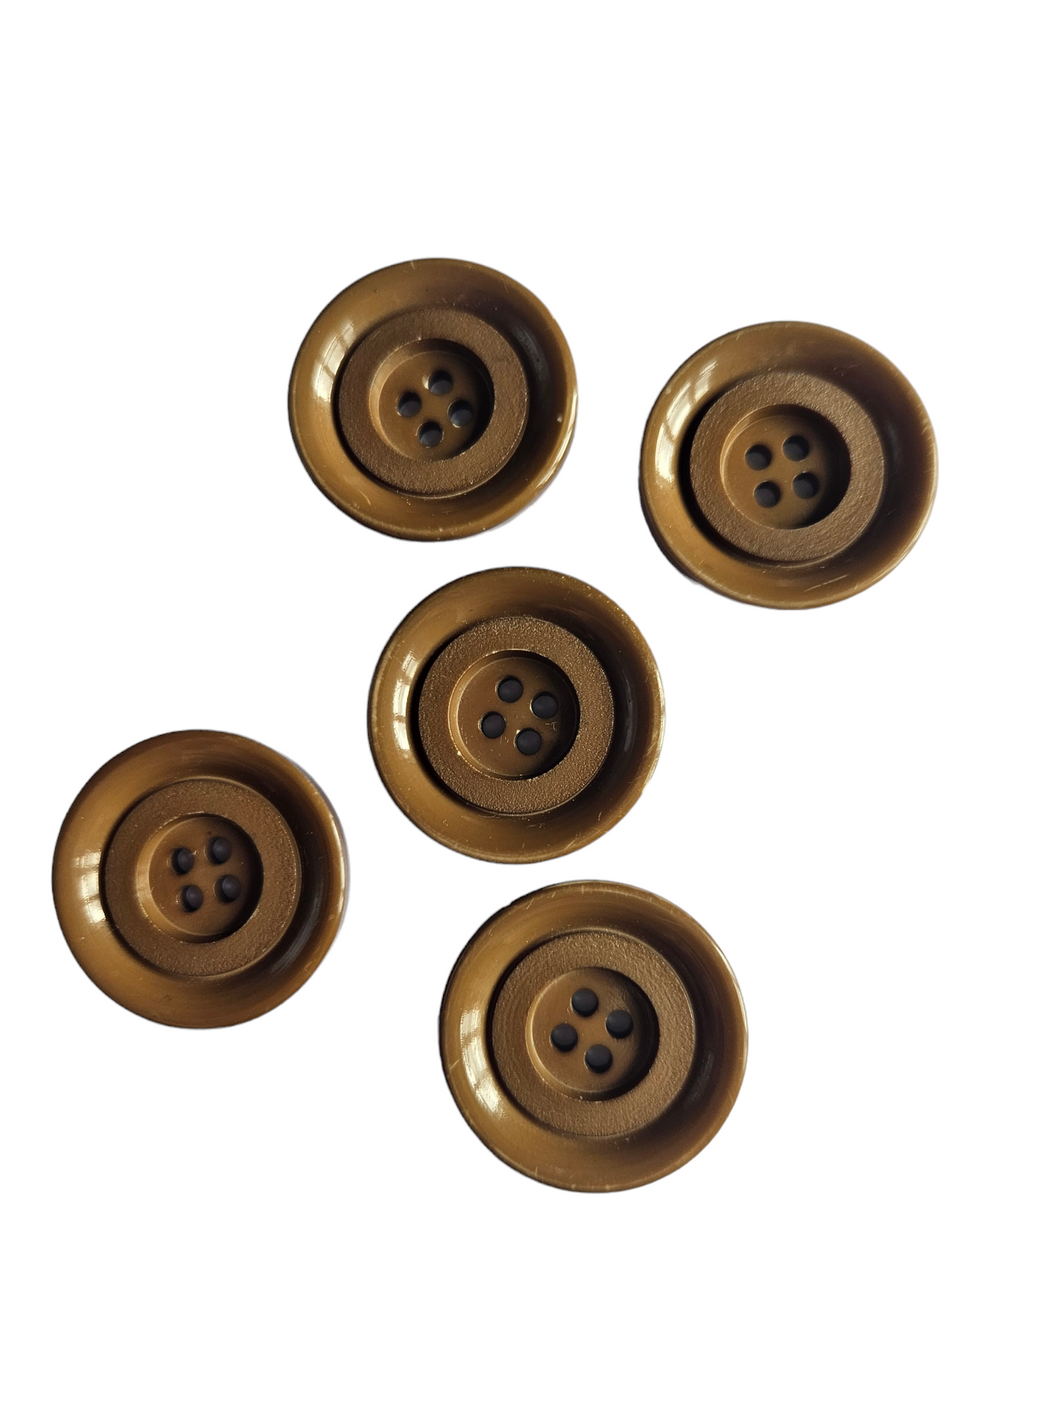 1940s Mocha Brown Buttons